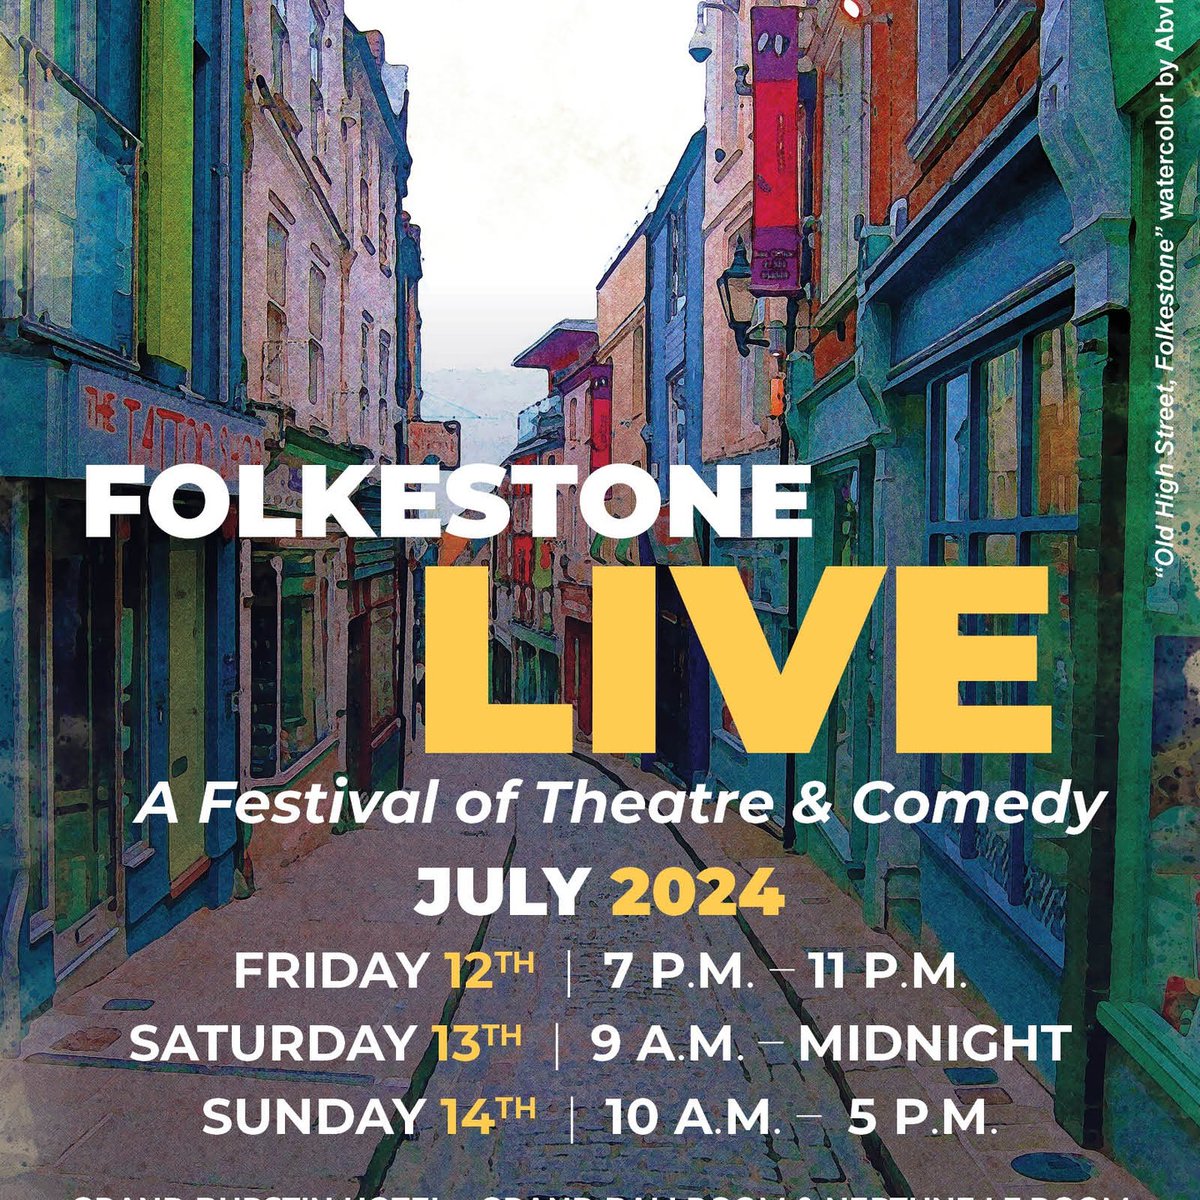 BRAND NEW #PerformingArts #Festival for #Folkestone #TicketsGoingOnSale NOW! FRIDAY 12th - SUNDAY 14 JULY 2024 #DatesForYourDiary #BookYourTickets #Theatre #Comedy #LiveMusic #FamilyShow #Cabaret #Dance #DontMissOut ticketsource.co.uk/folkestonelive